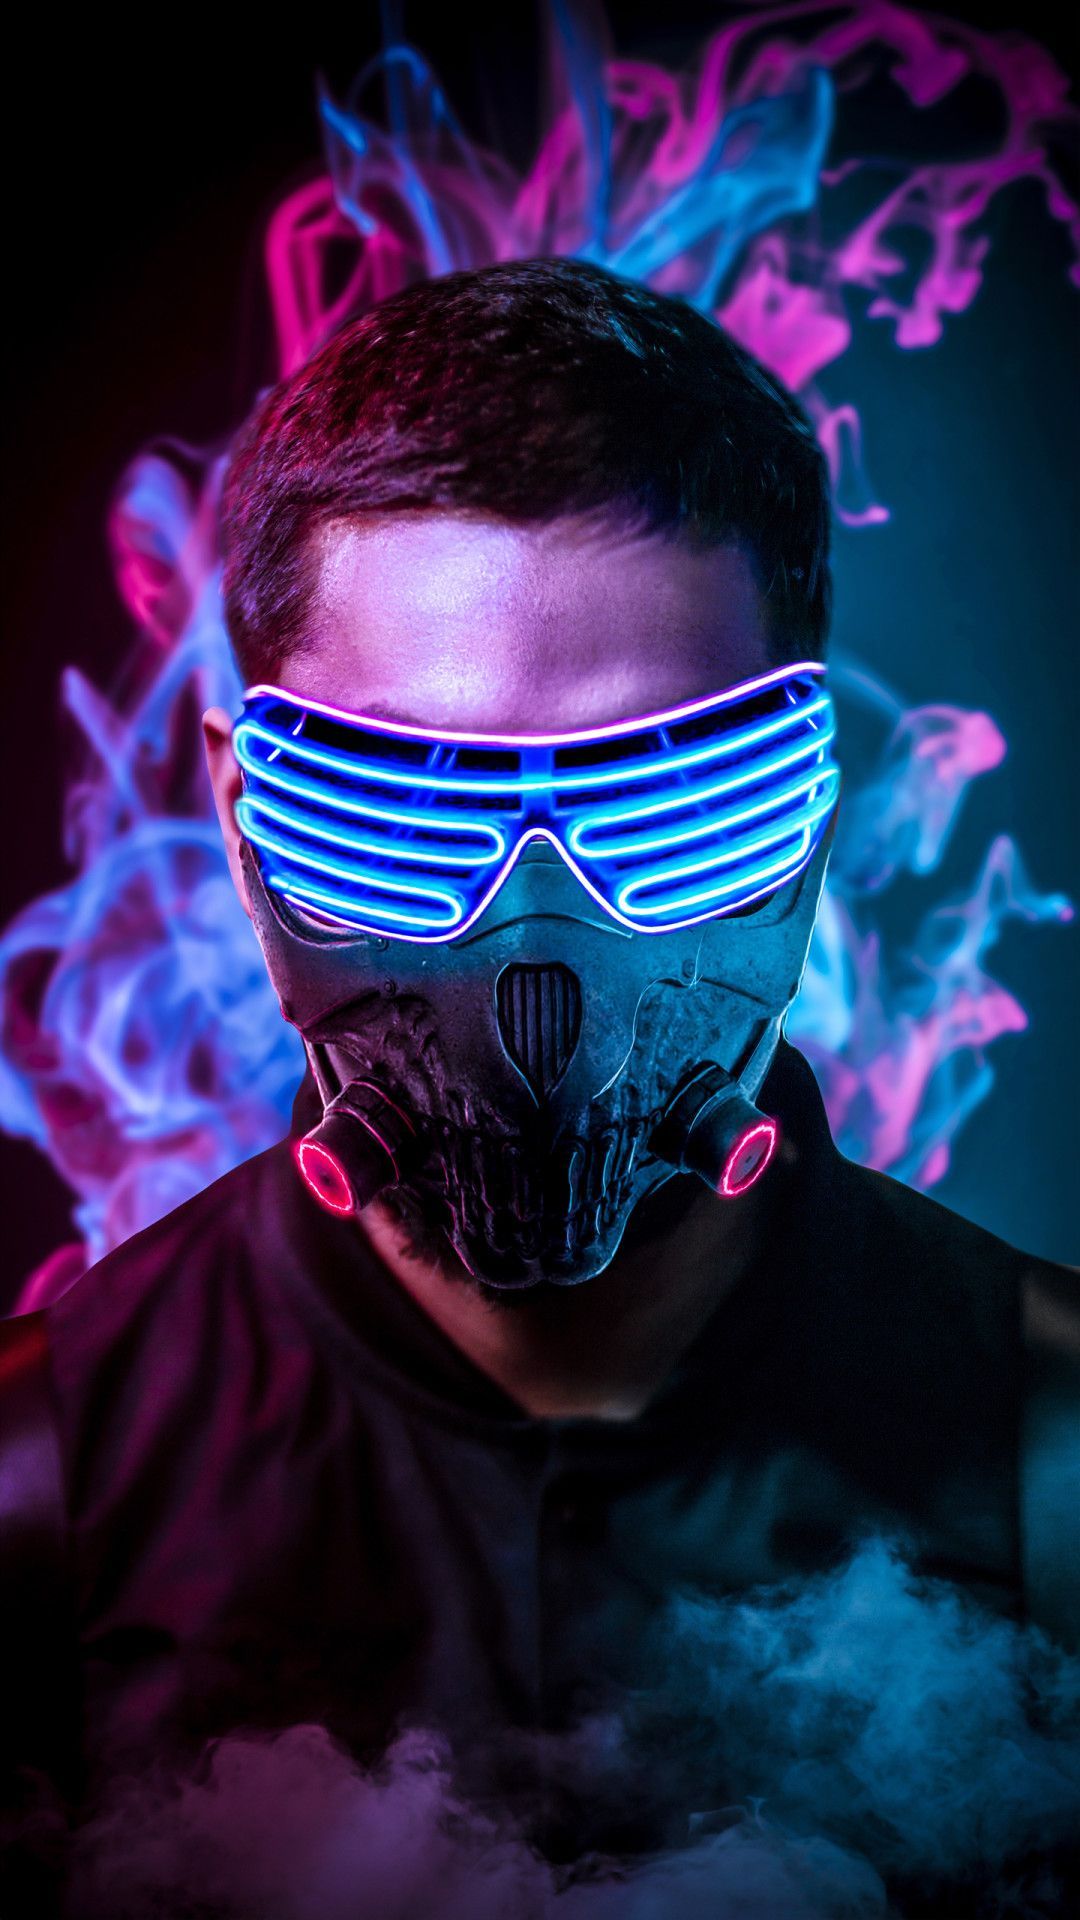 Mask Neon 4k Mobile Wallpaper iPhone, Android, Samsung, Pixel